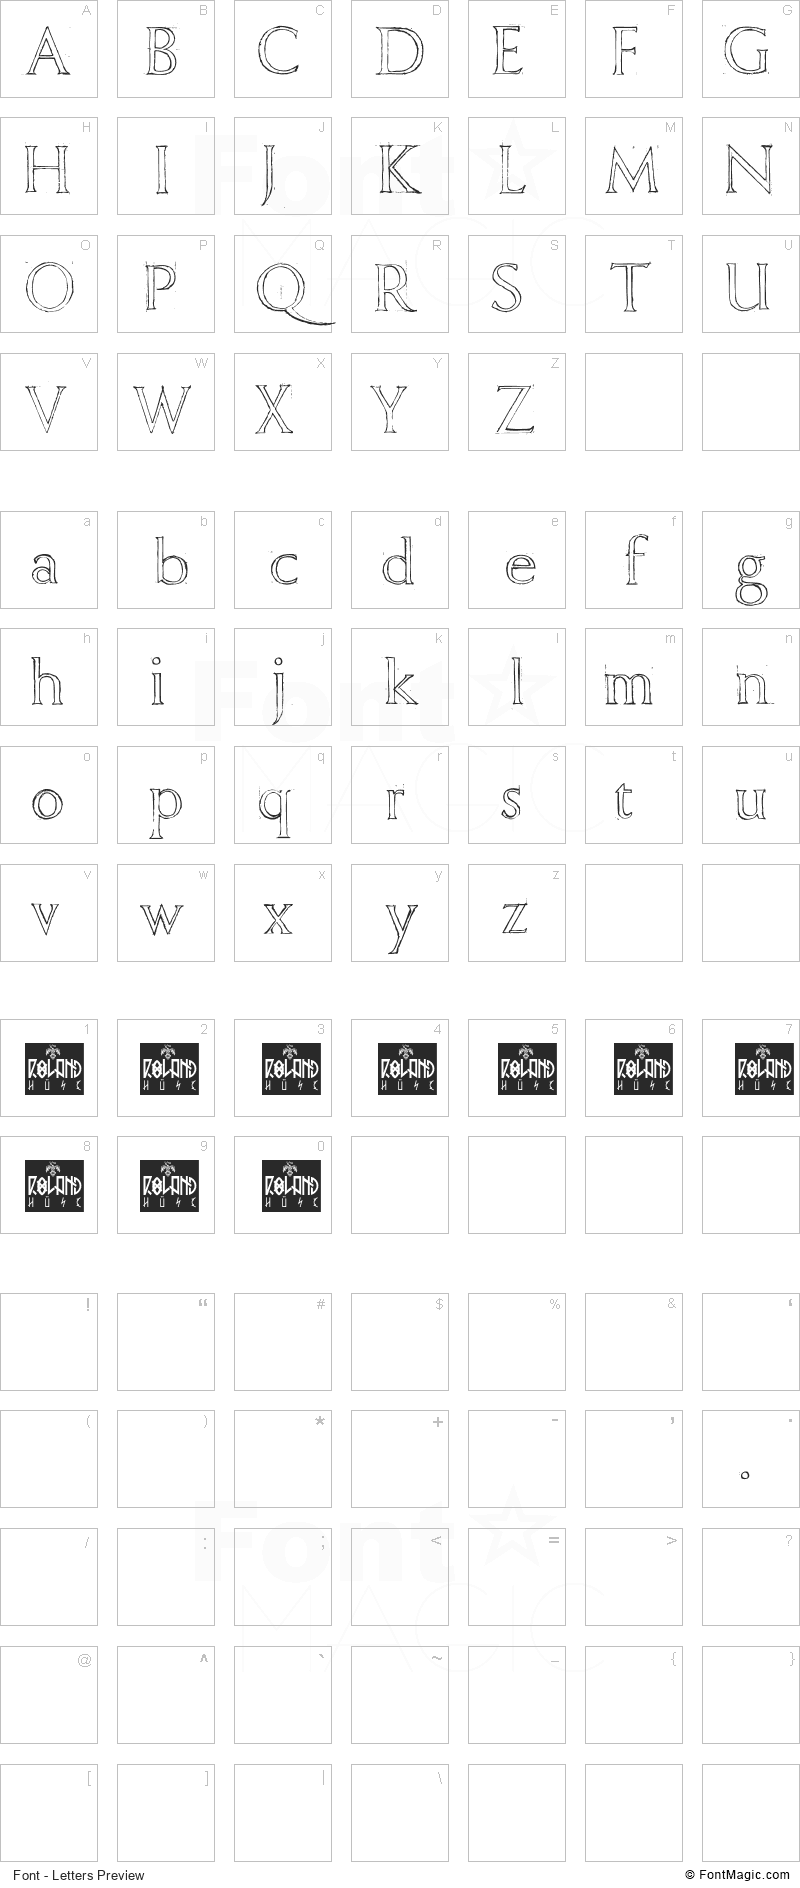 Freehand Roman Font - All Latters Preview Chart